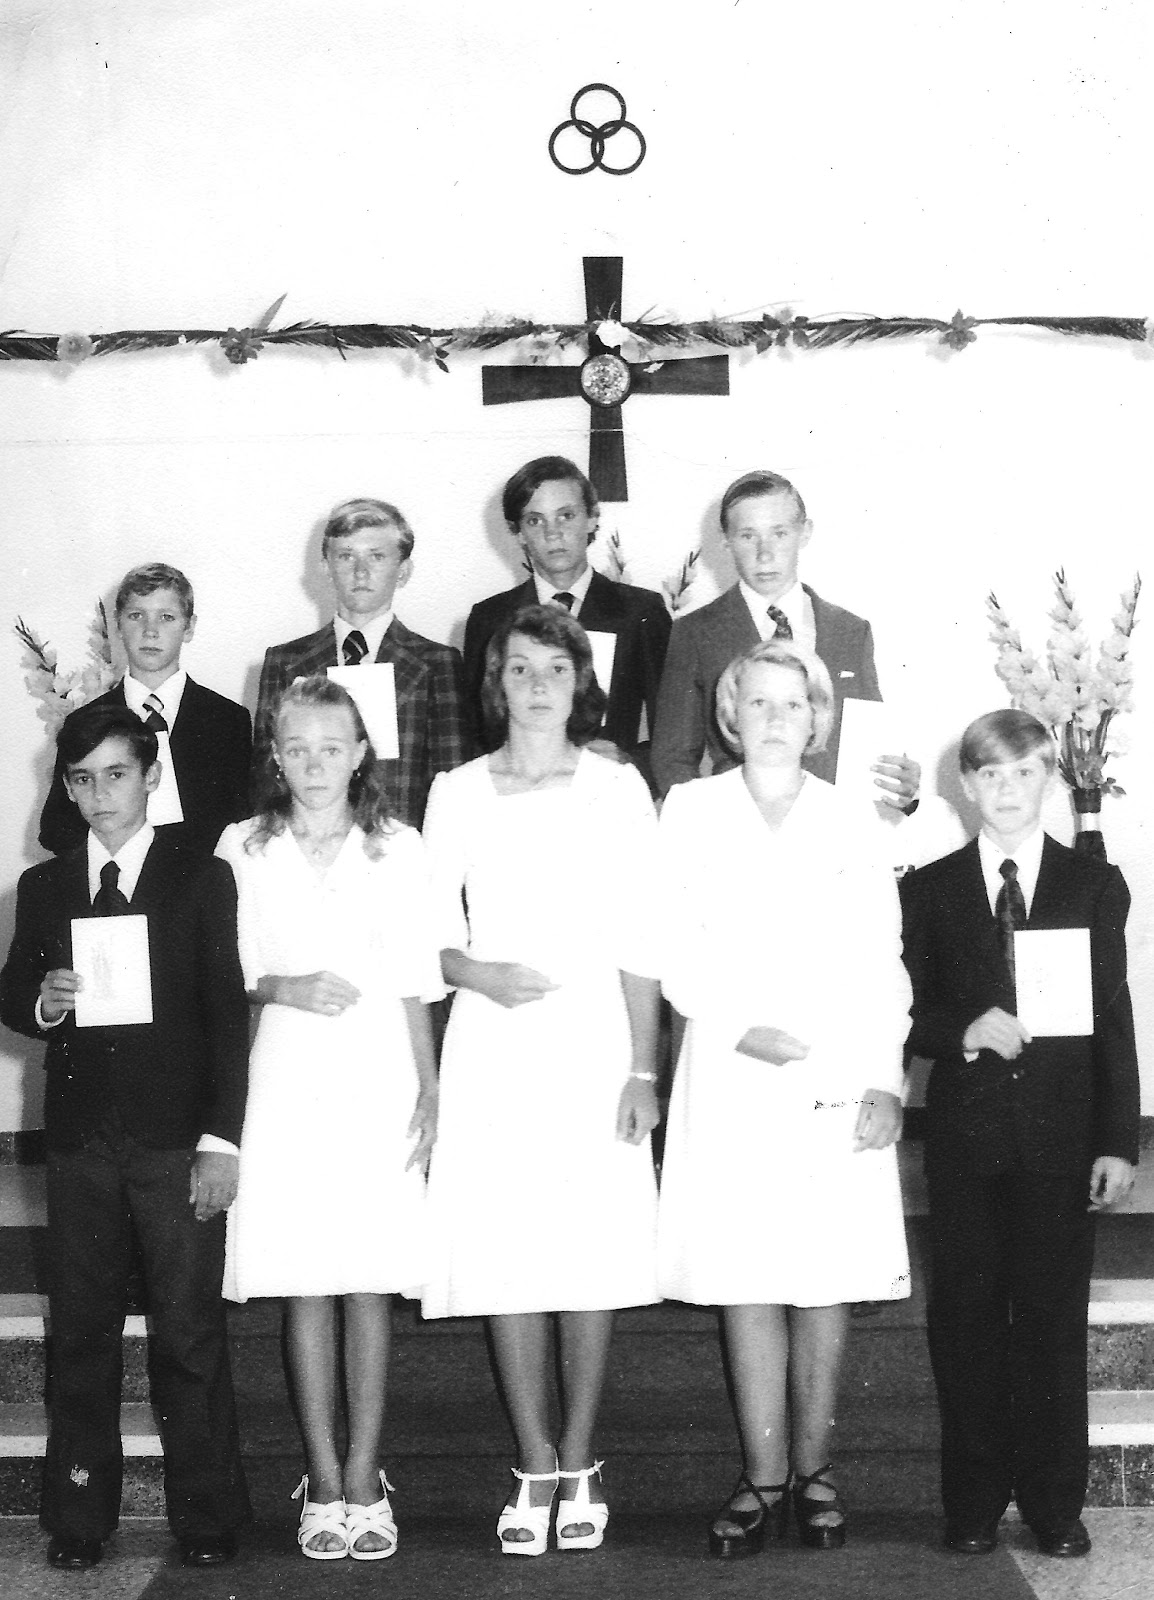 1977 Confirmation Class from the IERP Church in El Potrero.  Source: Leandro Hildt. 